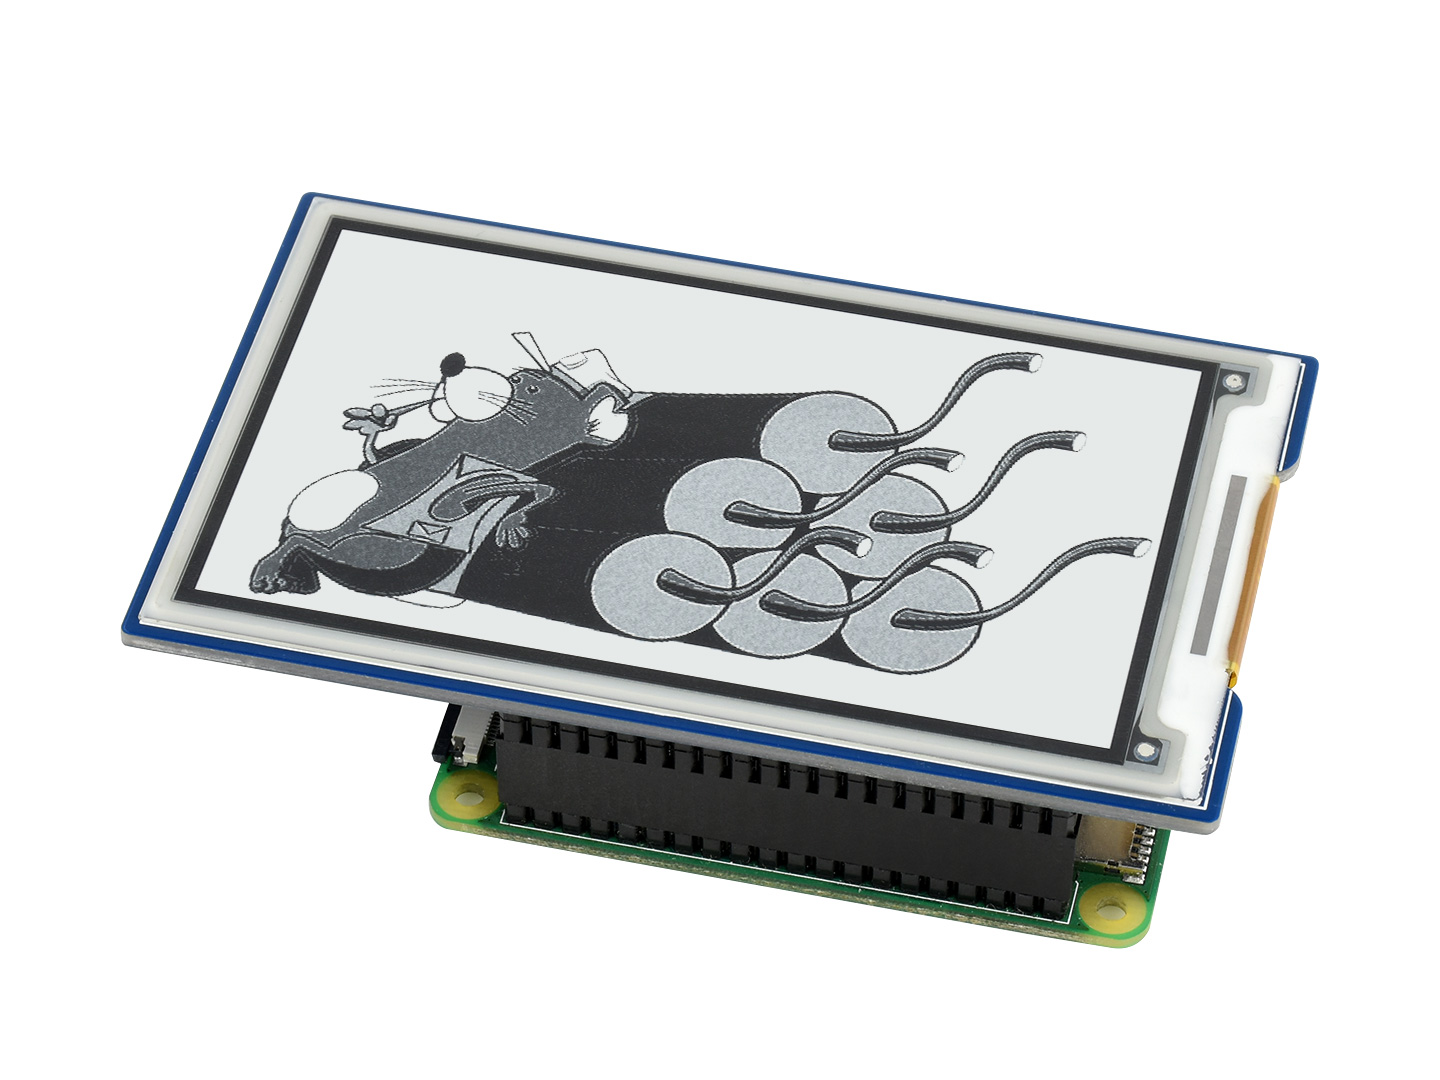 3.7inch e-Paper e-Ink Display HAT For Raspberry Pi, 480*280, Black / White, 4 Grey Scales, SPI